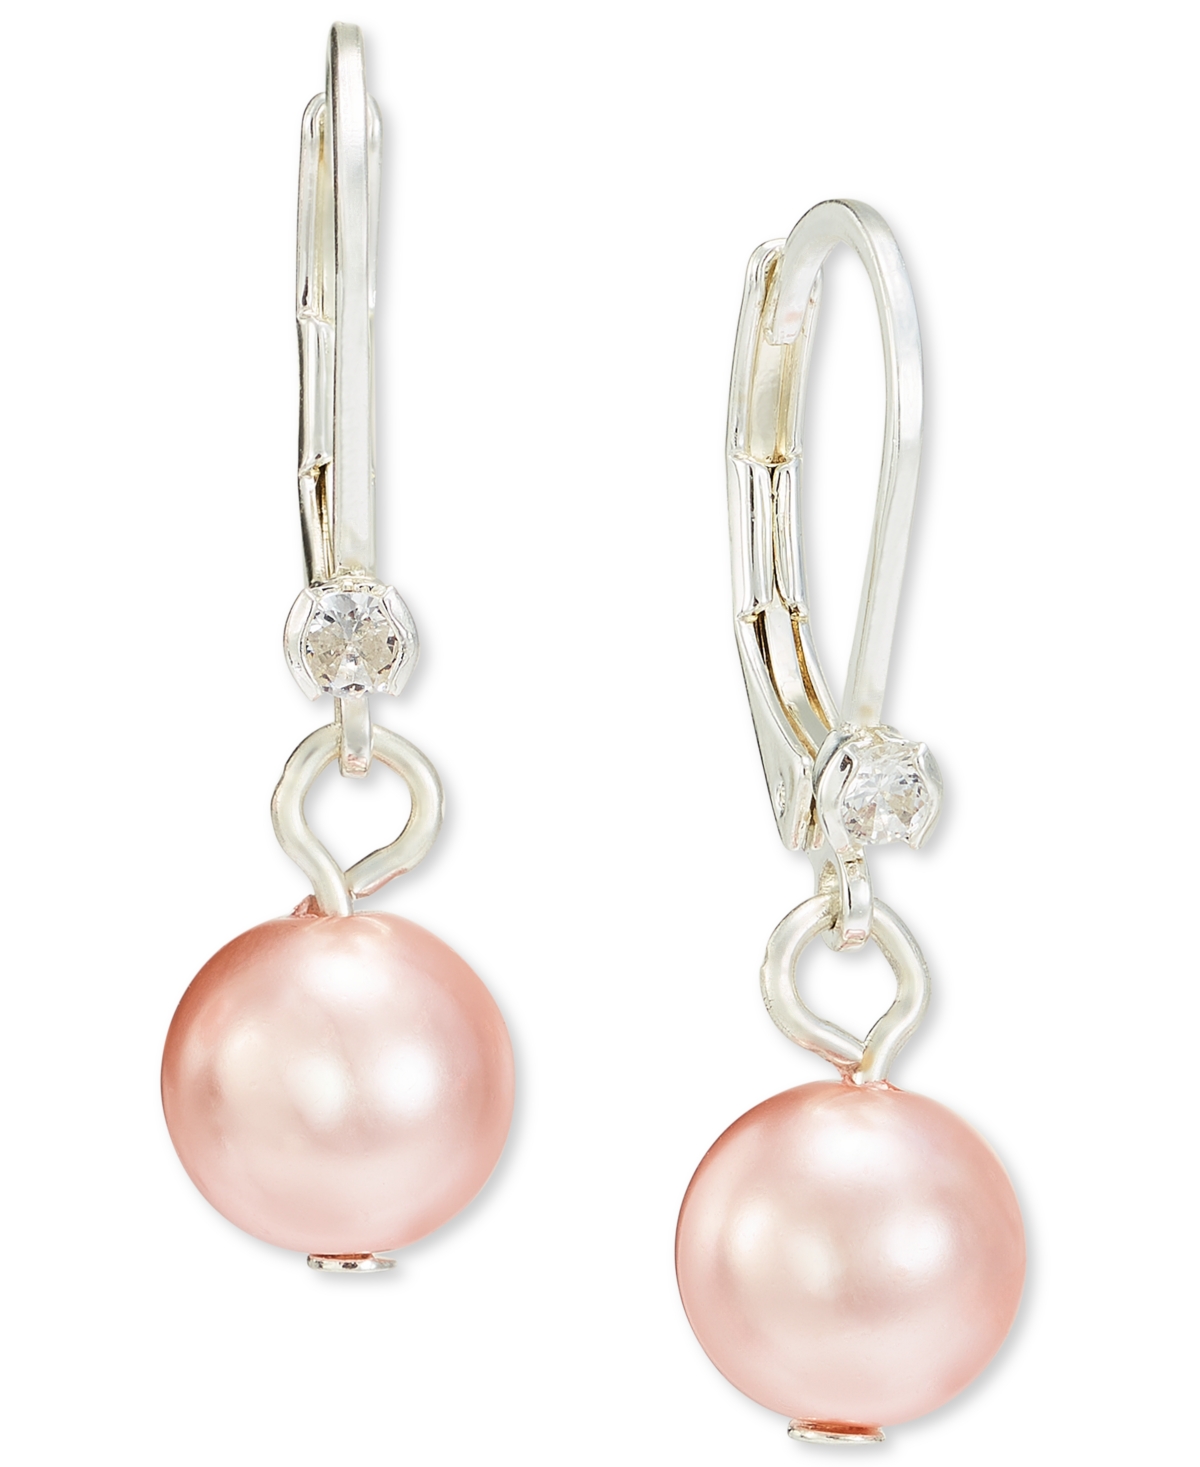 Silver-Tone Imitation Pearl & Crystal Leverback Drop Earrings, Created for Macy's - Pink